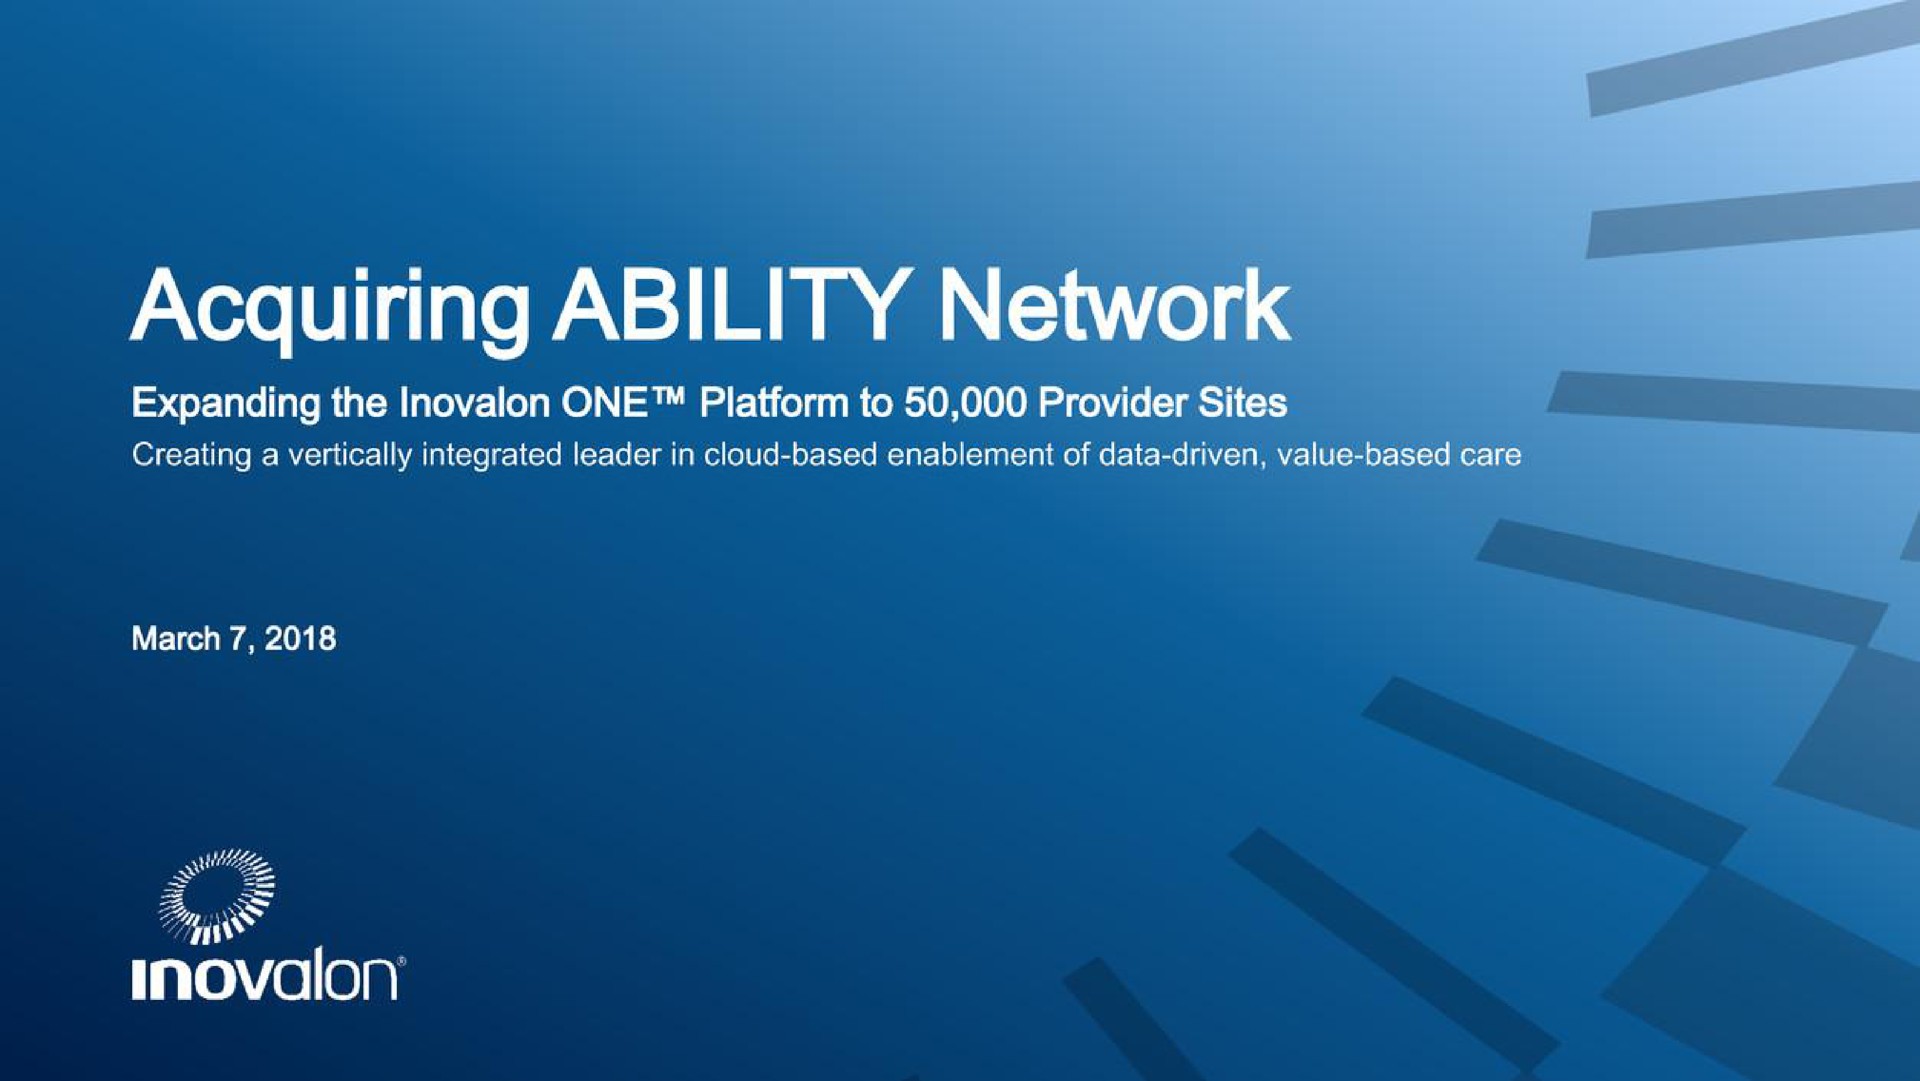 acquiring ability expanding the one platform to provider sites | Inovalon